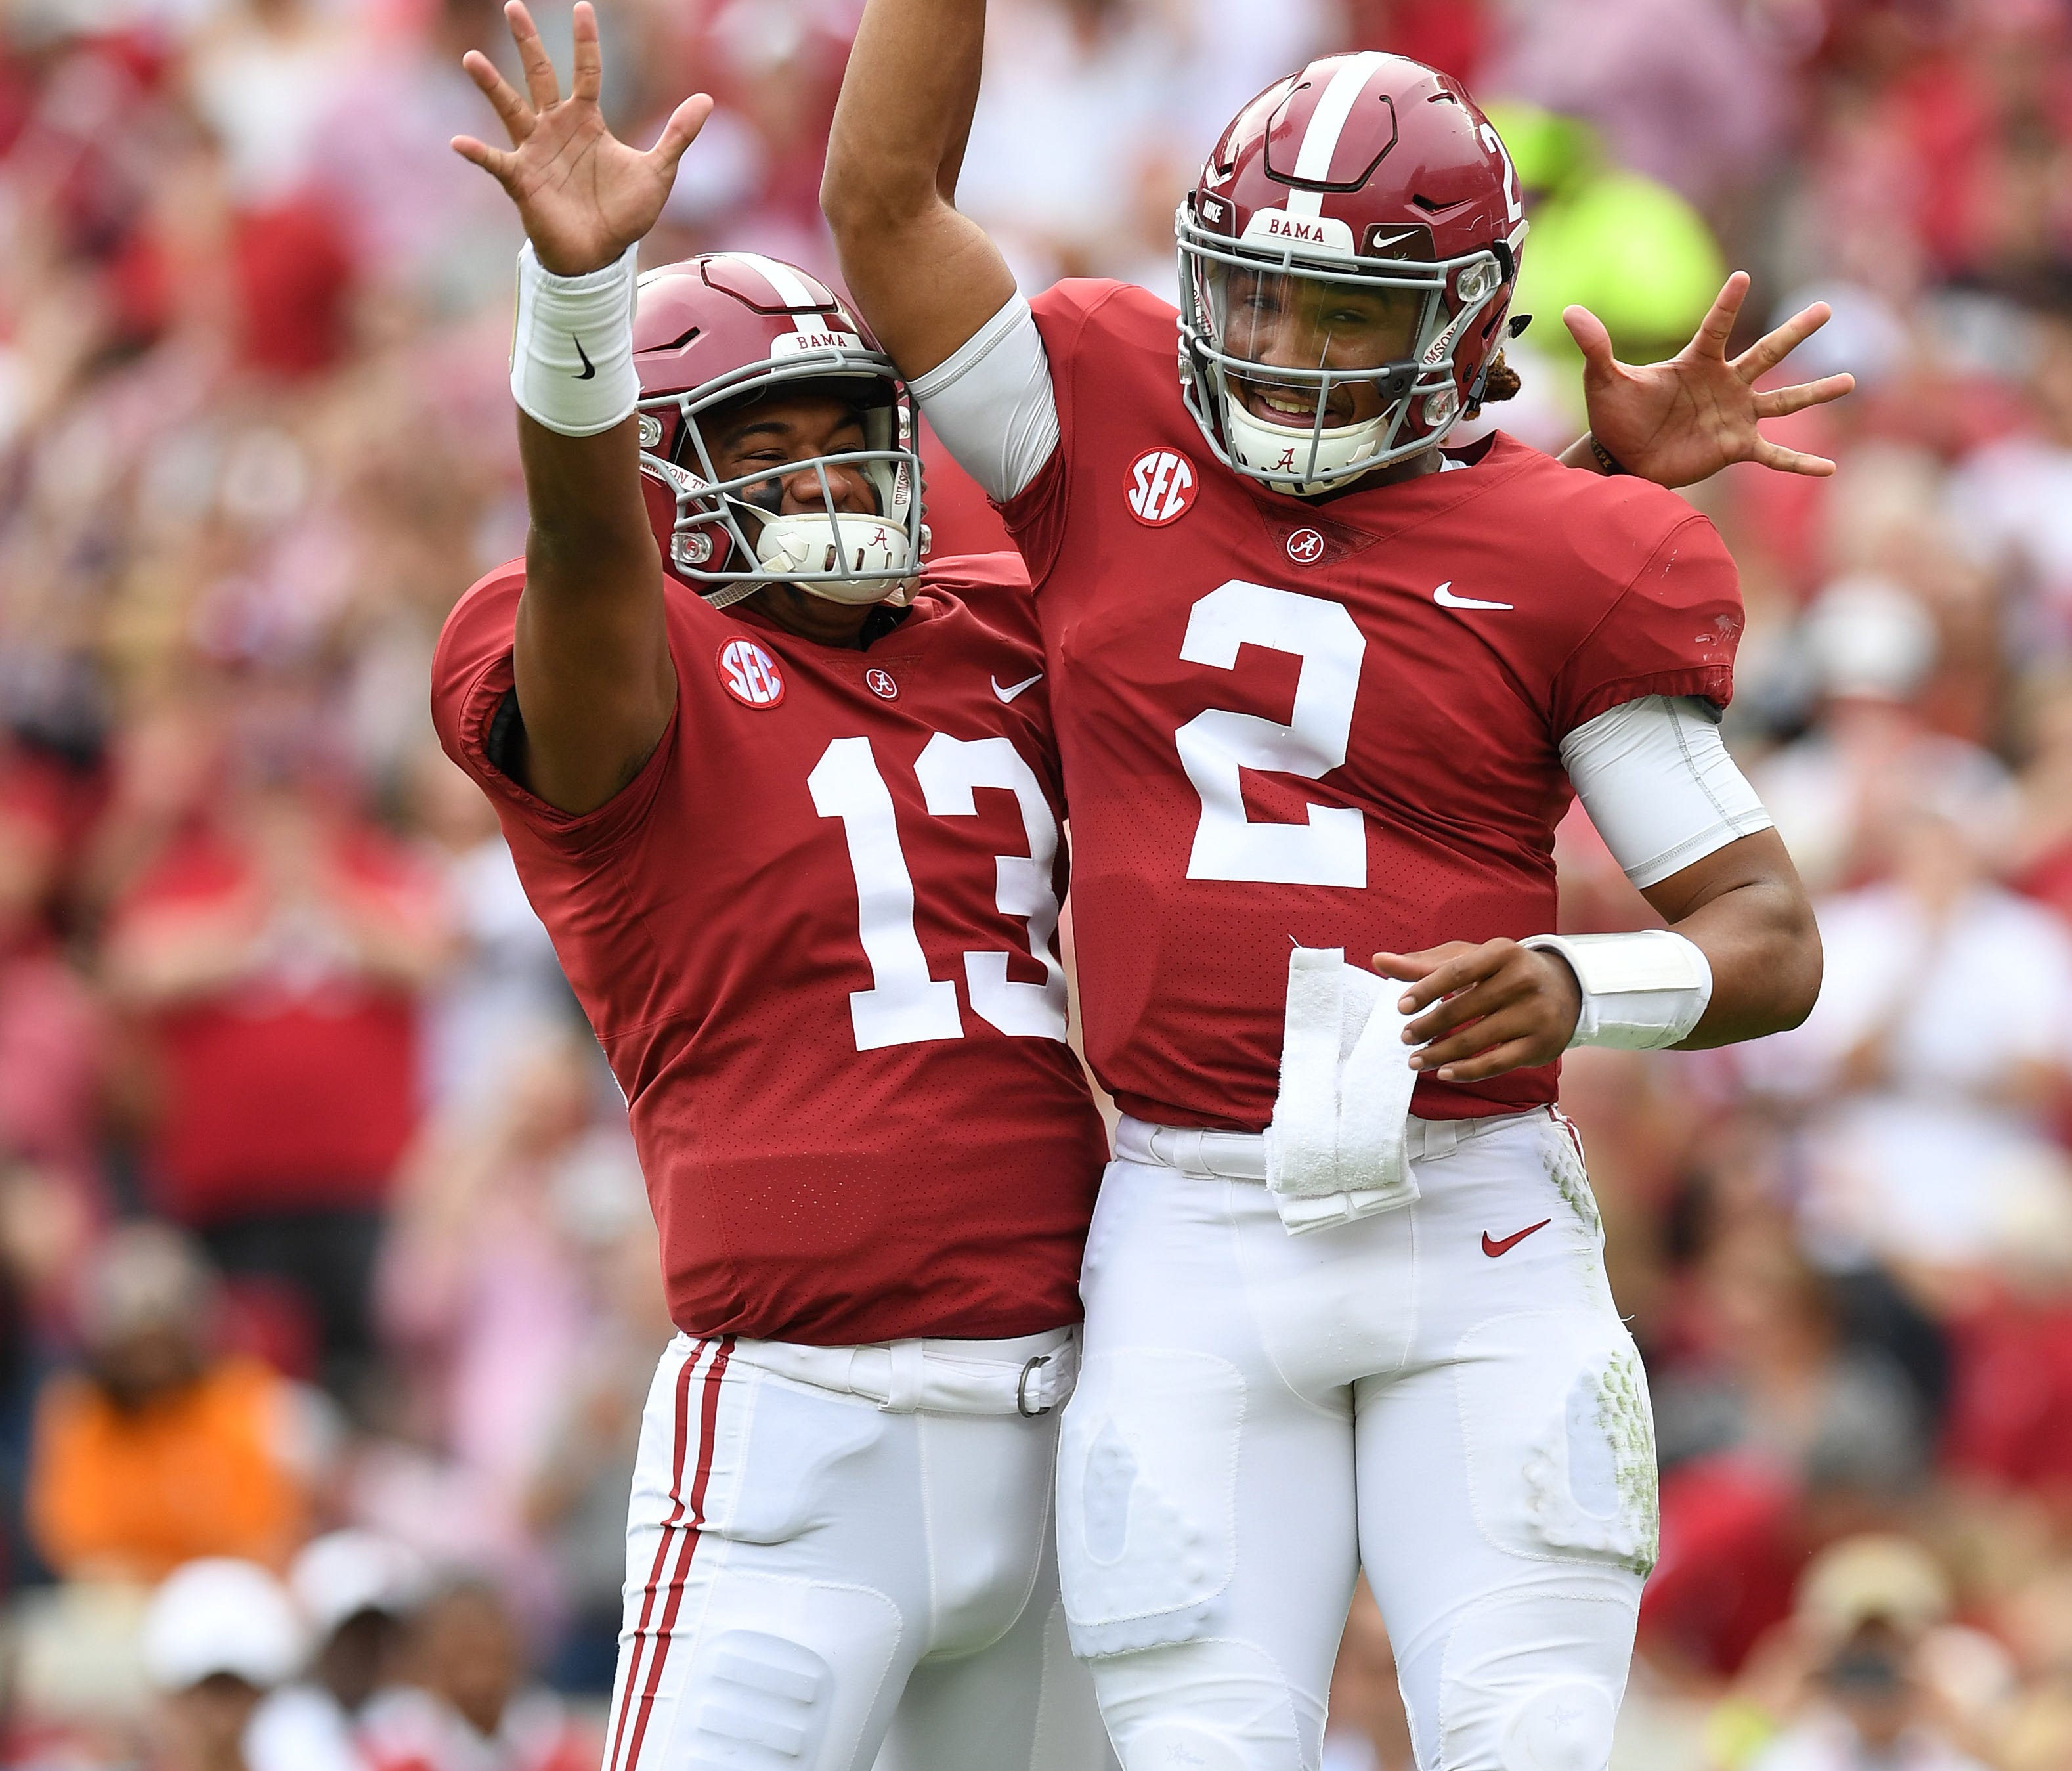 Alabama quarterback Jalen Hurts (2) celebrates a touchdown against Tennessee with Tua Tagovailoa during their game in 2017.